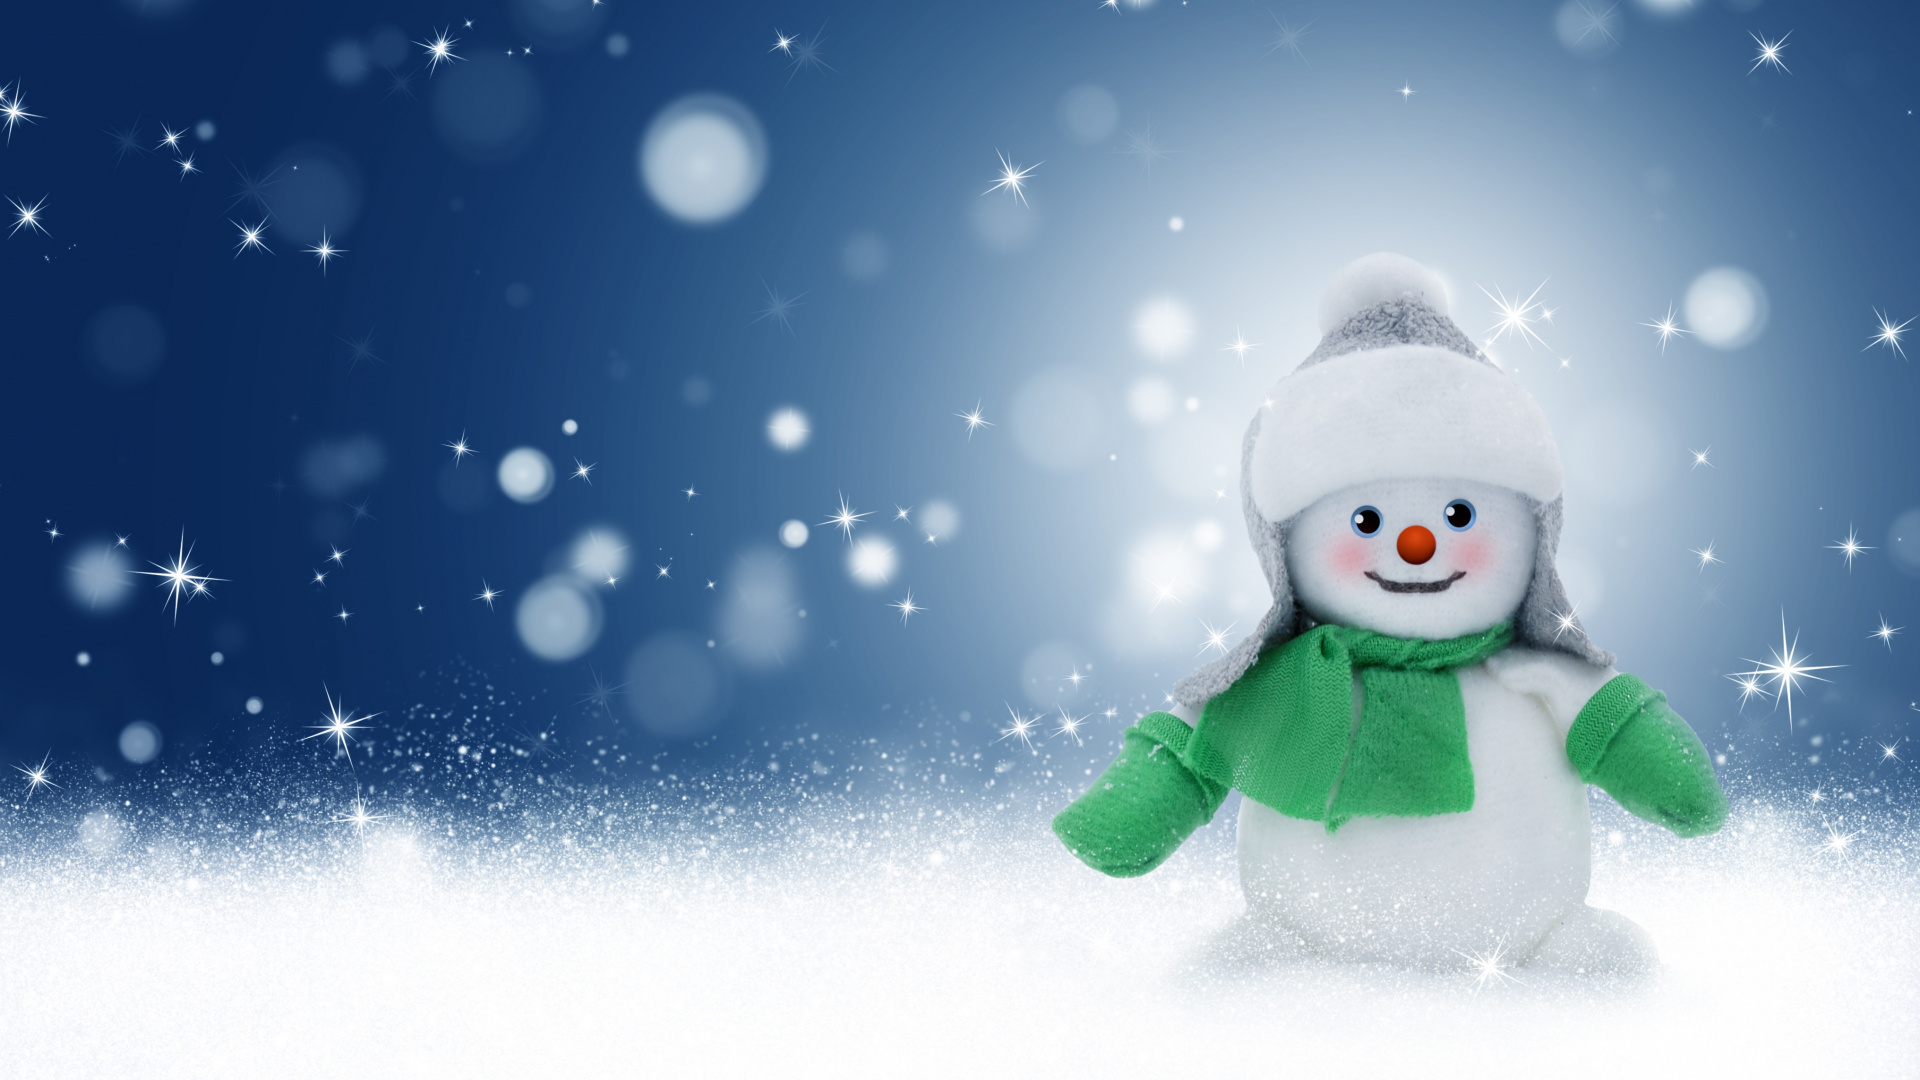 Christmas Day, Snow, Winter, Snowman, Playing in The Snow. Wallpaper in 1920x1080 Resolution